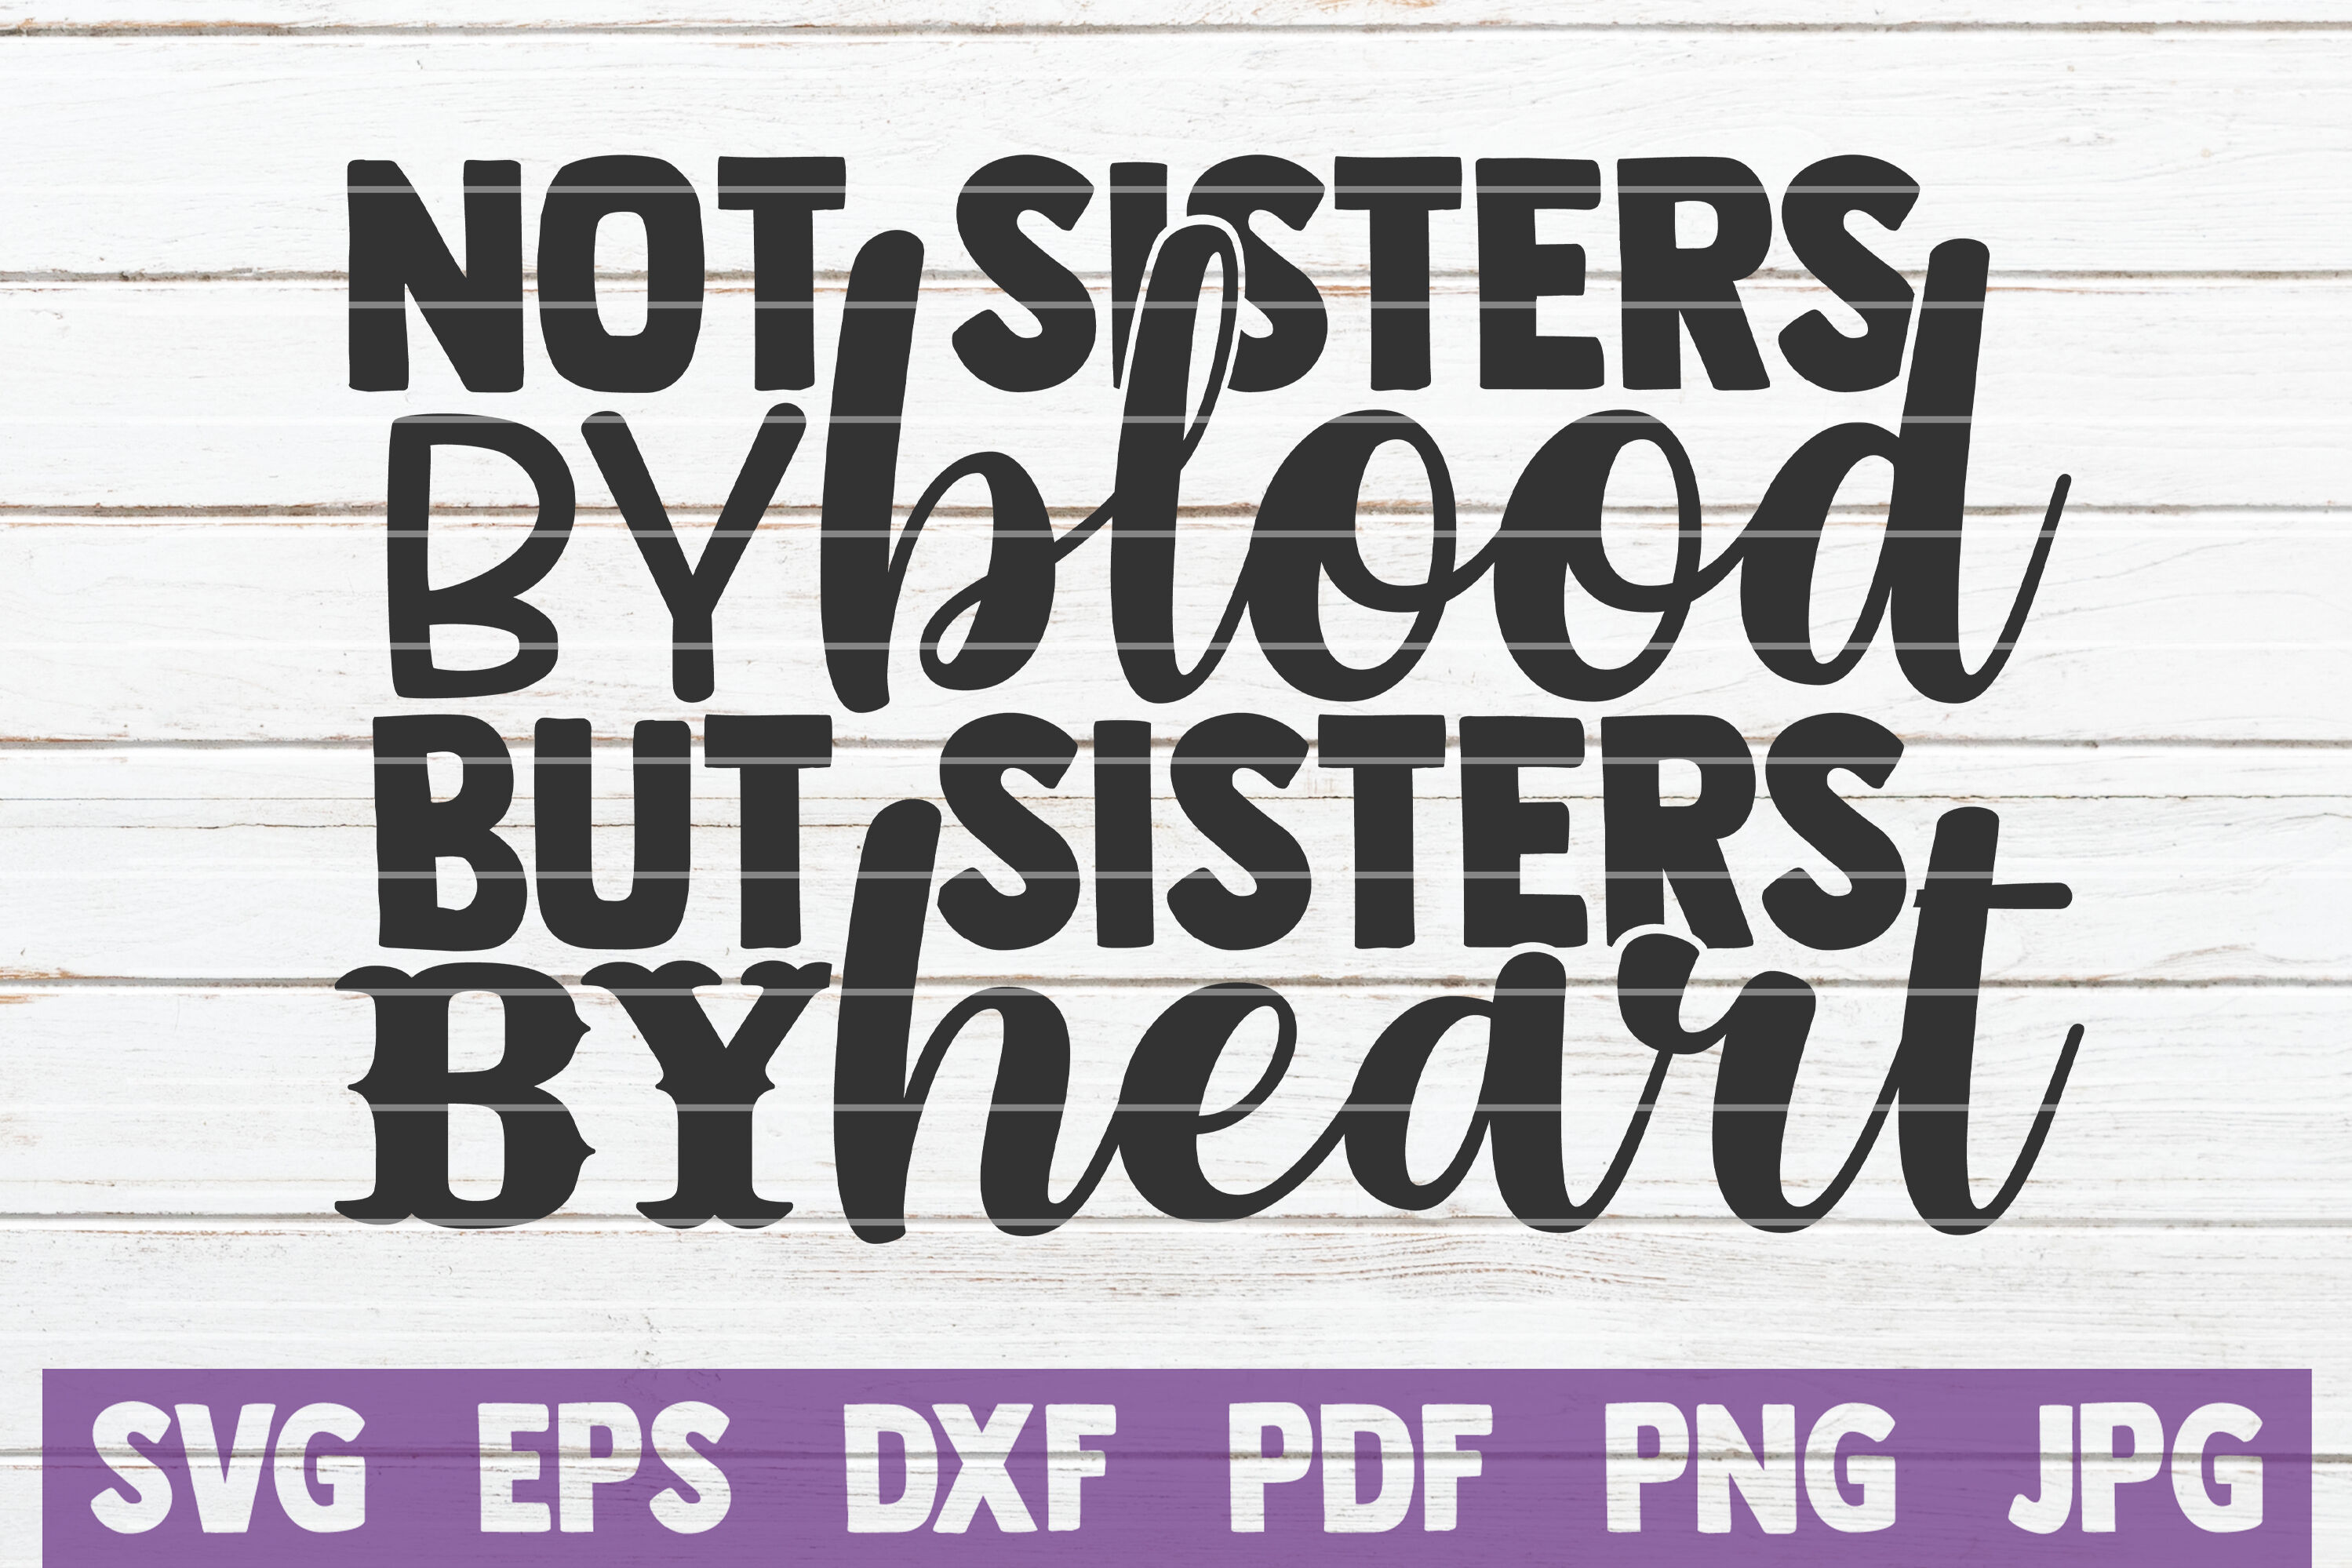 Not Sisters By Blood But Sisters By Heart Svg Cut File By Mintymarshmallows Thehungryjpeg Com